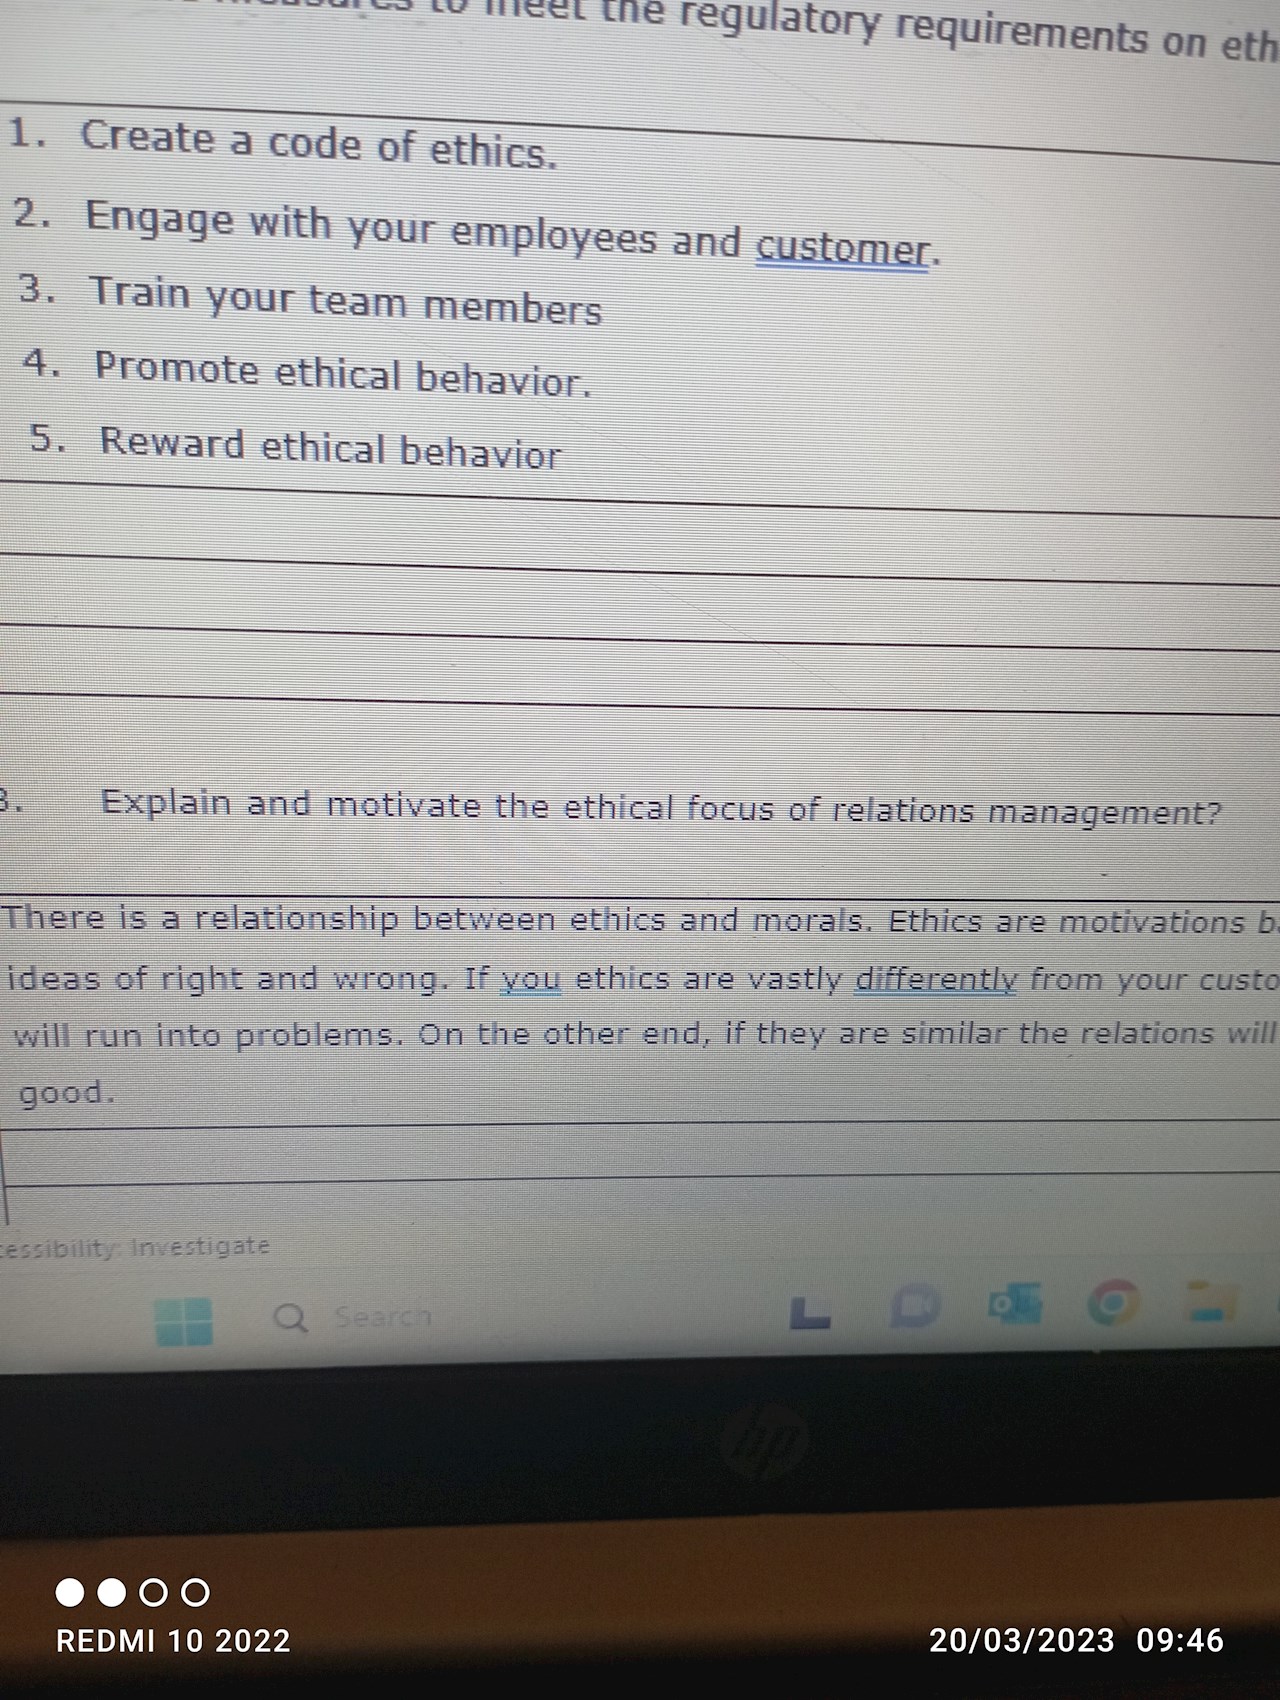 Explain the ethical focus of relations management ?